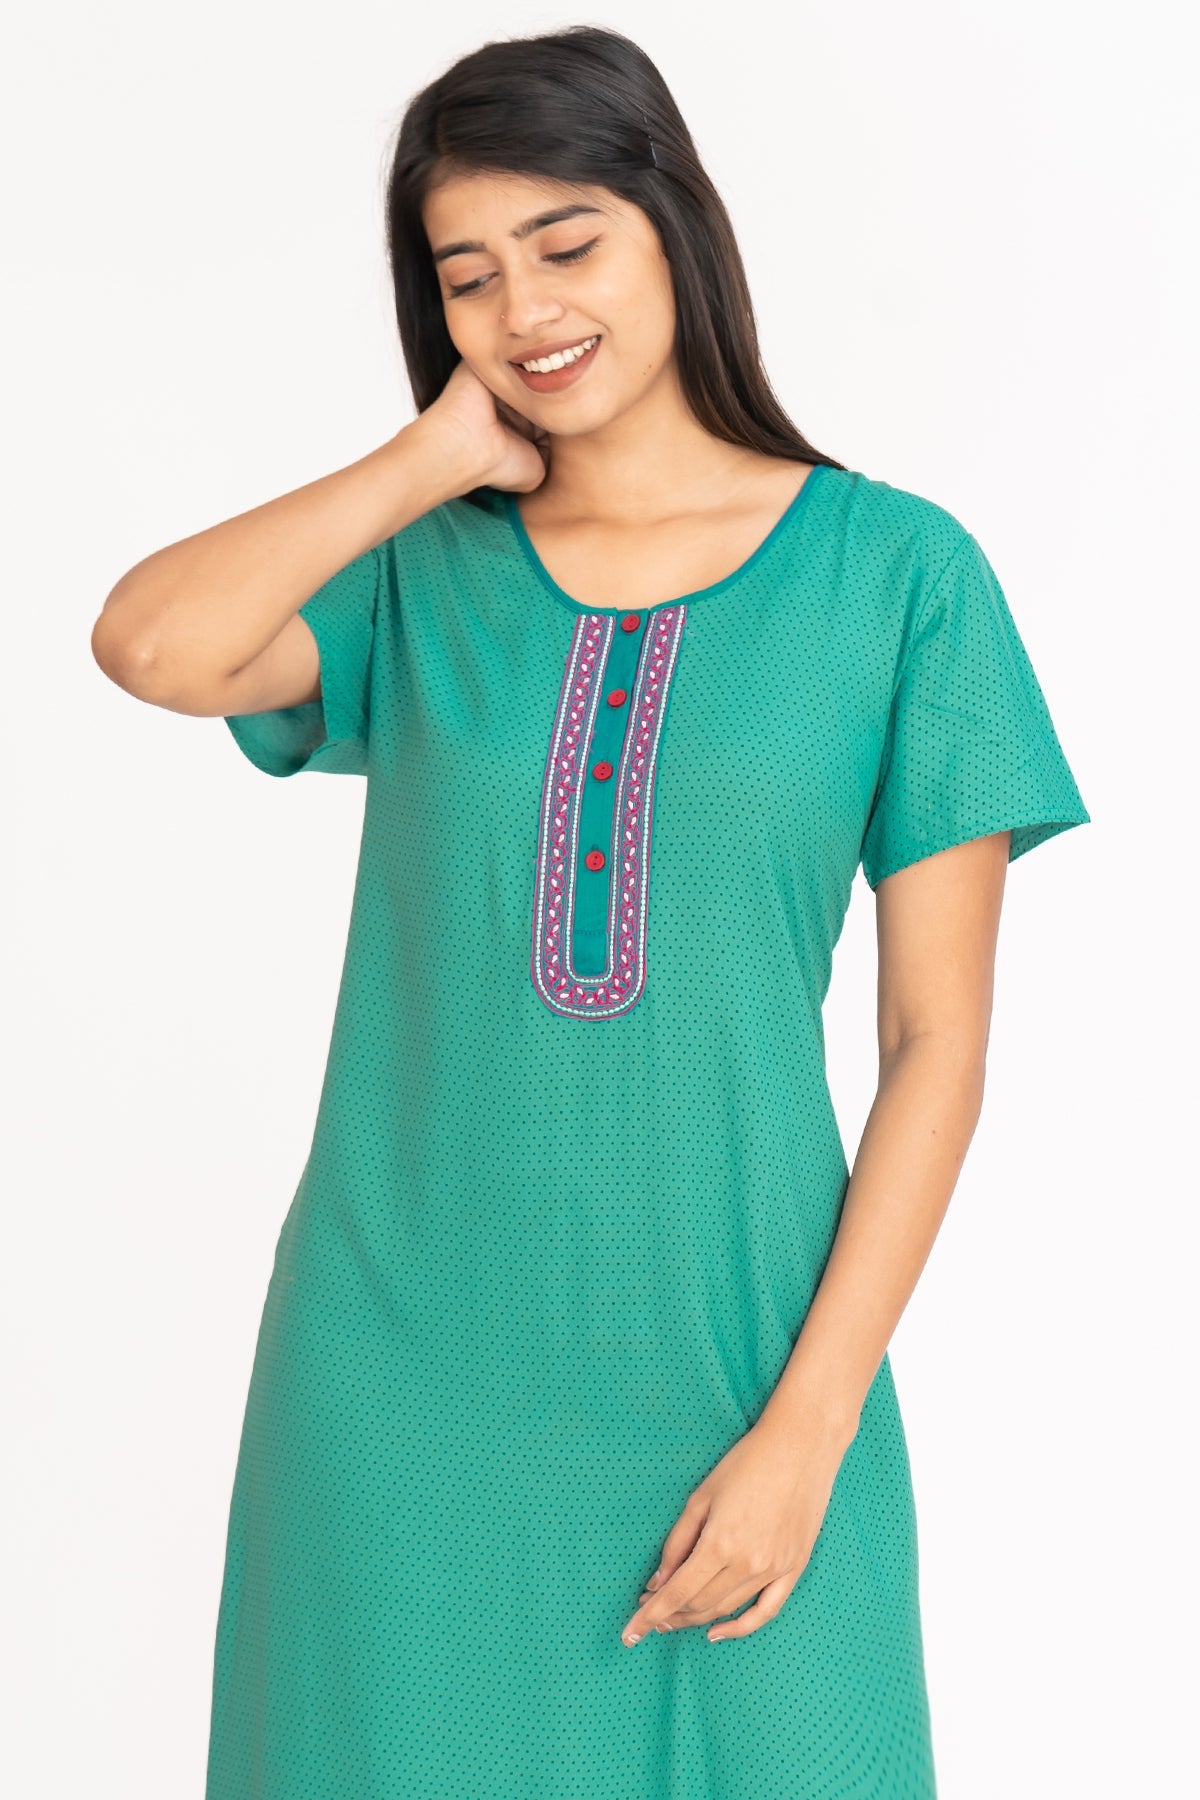 All Over Ditsy Polka Dot Printed With Embroidered Yoke Nighty - Green